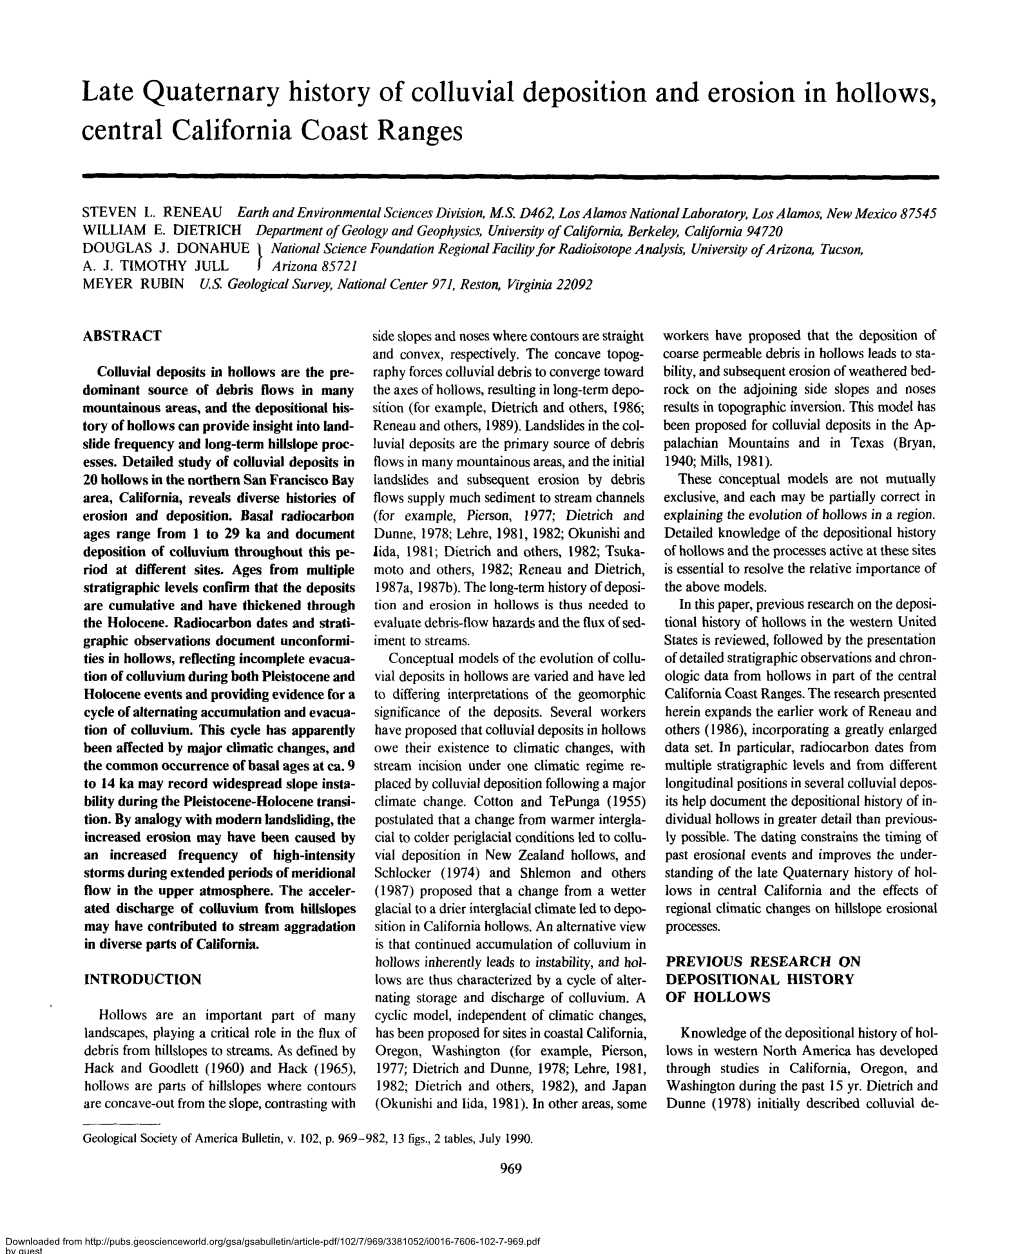 Late Quaternary History of Colluvial Deposition and Erosion in Hollows, Central California Coast Ranges